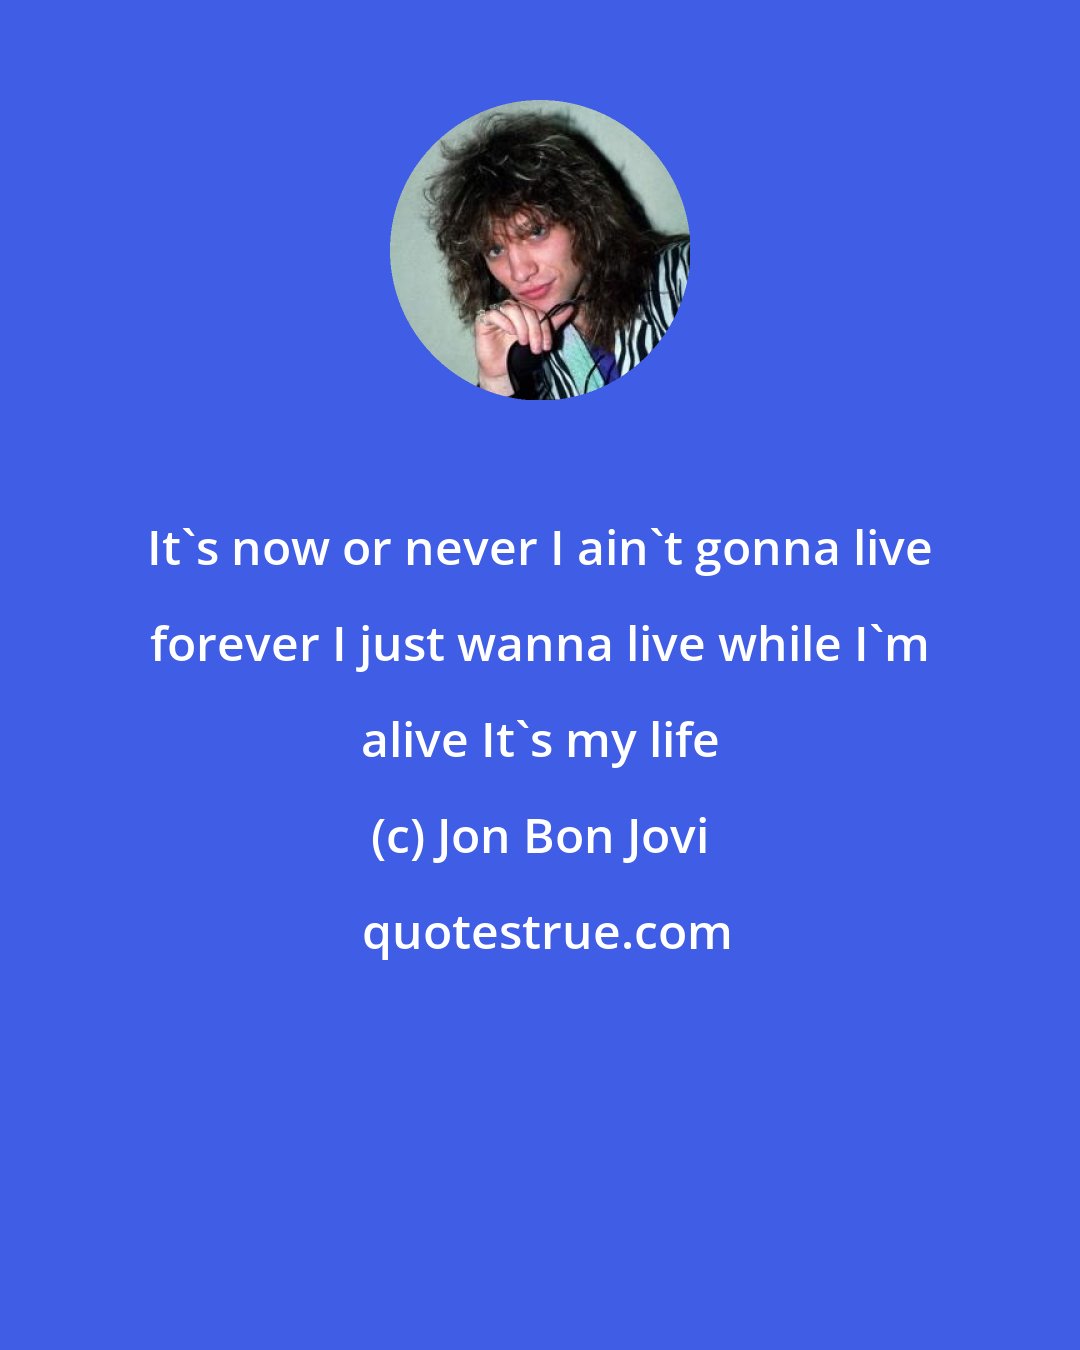 Jon Bon Jovi: It's now or never I ain't gonna live forever I just wanna live while I'm alive It's my life